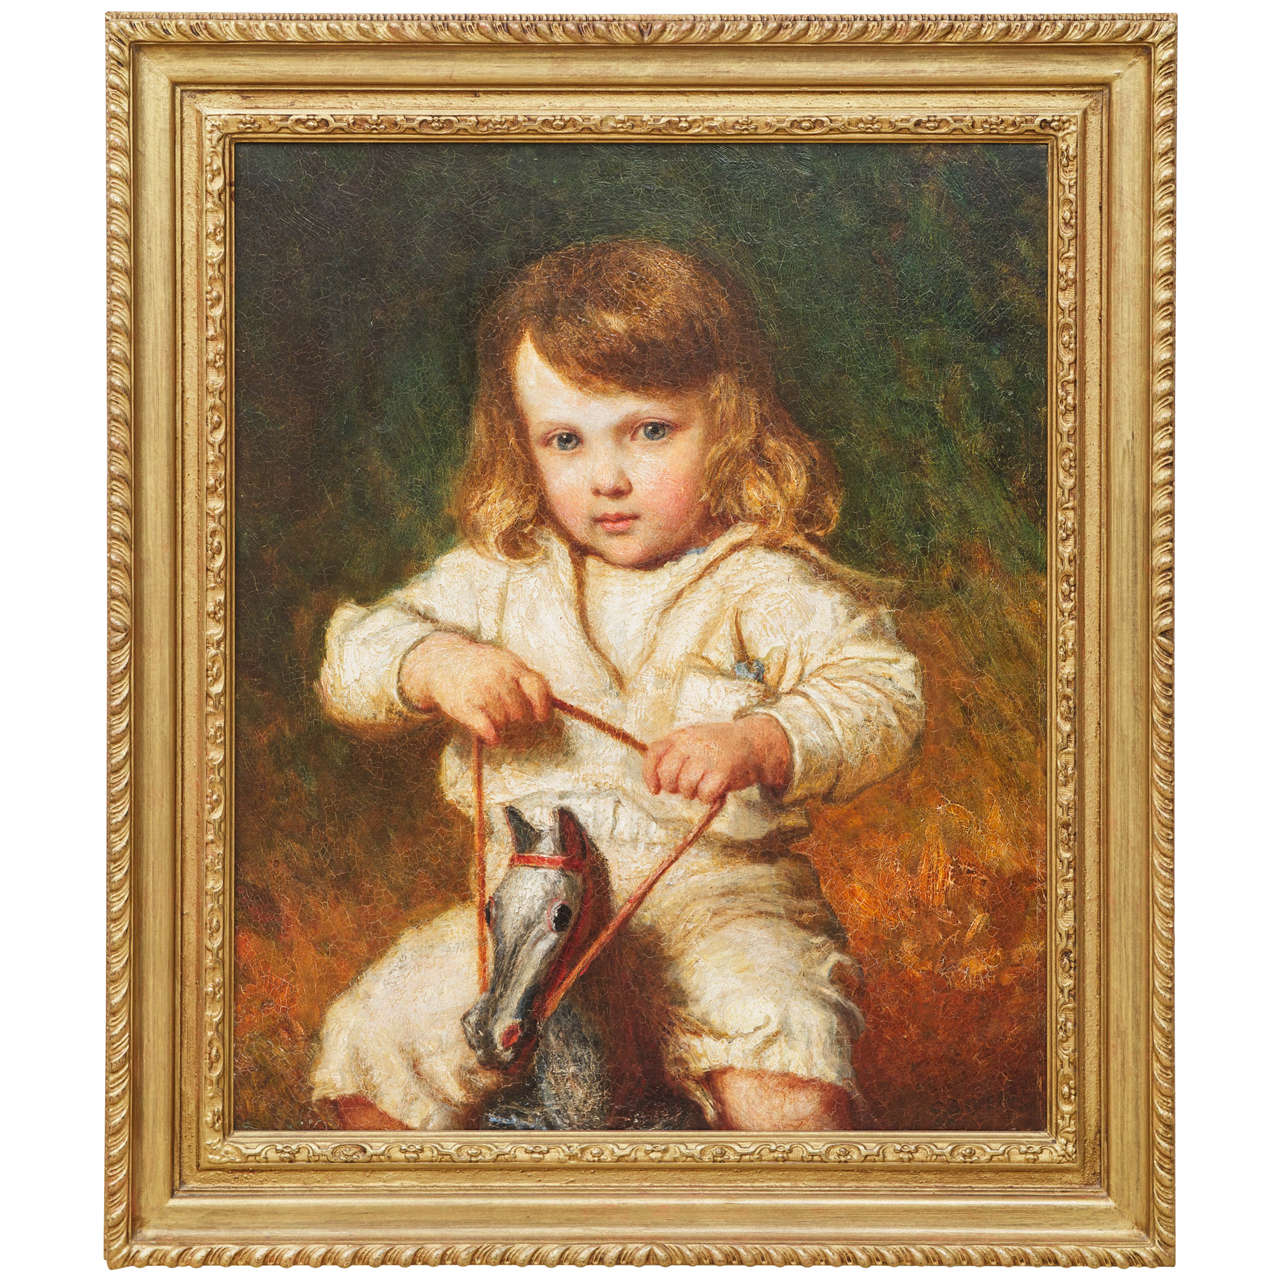 A Portrait of a Young Child on a Rocking Horse by Carl Wilhem Friedrick Bauerle